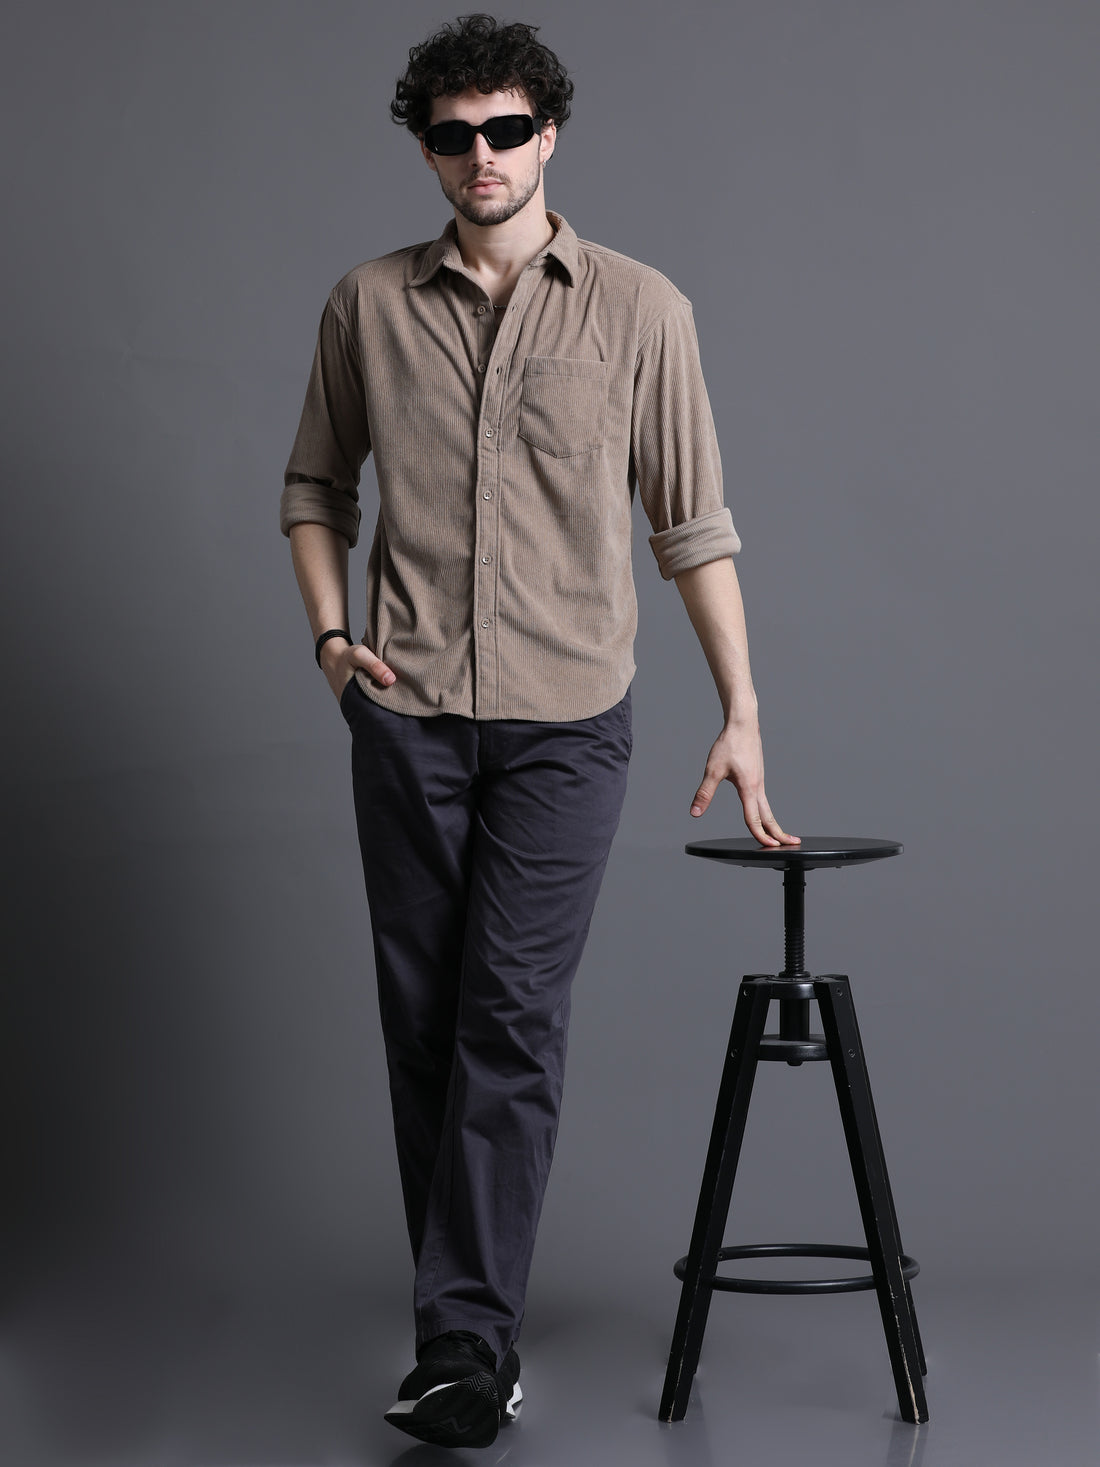 Men's Cord Shirt - Timeless Style for Every Occasion